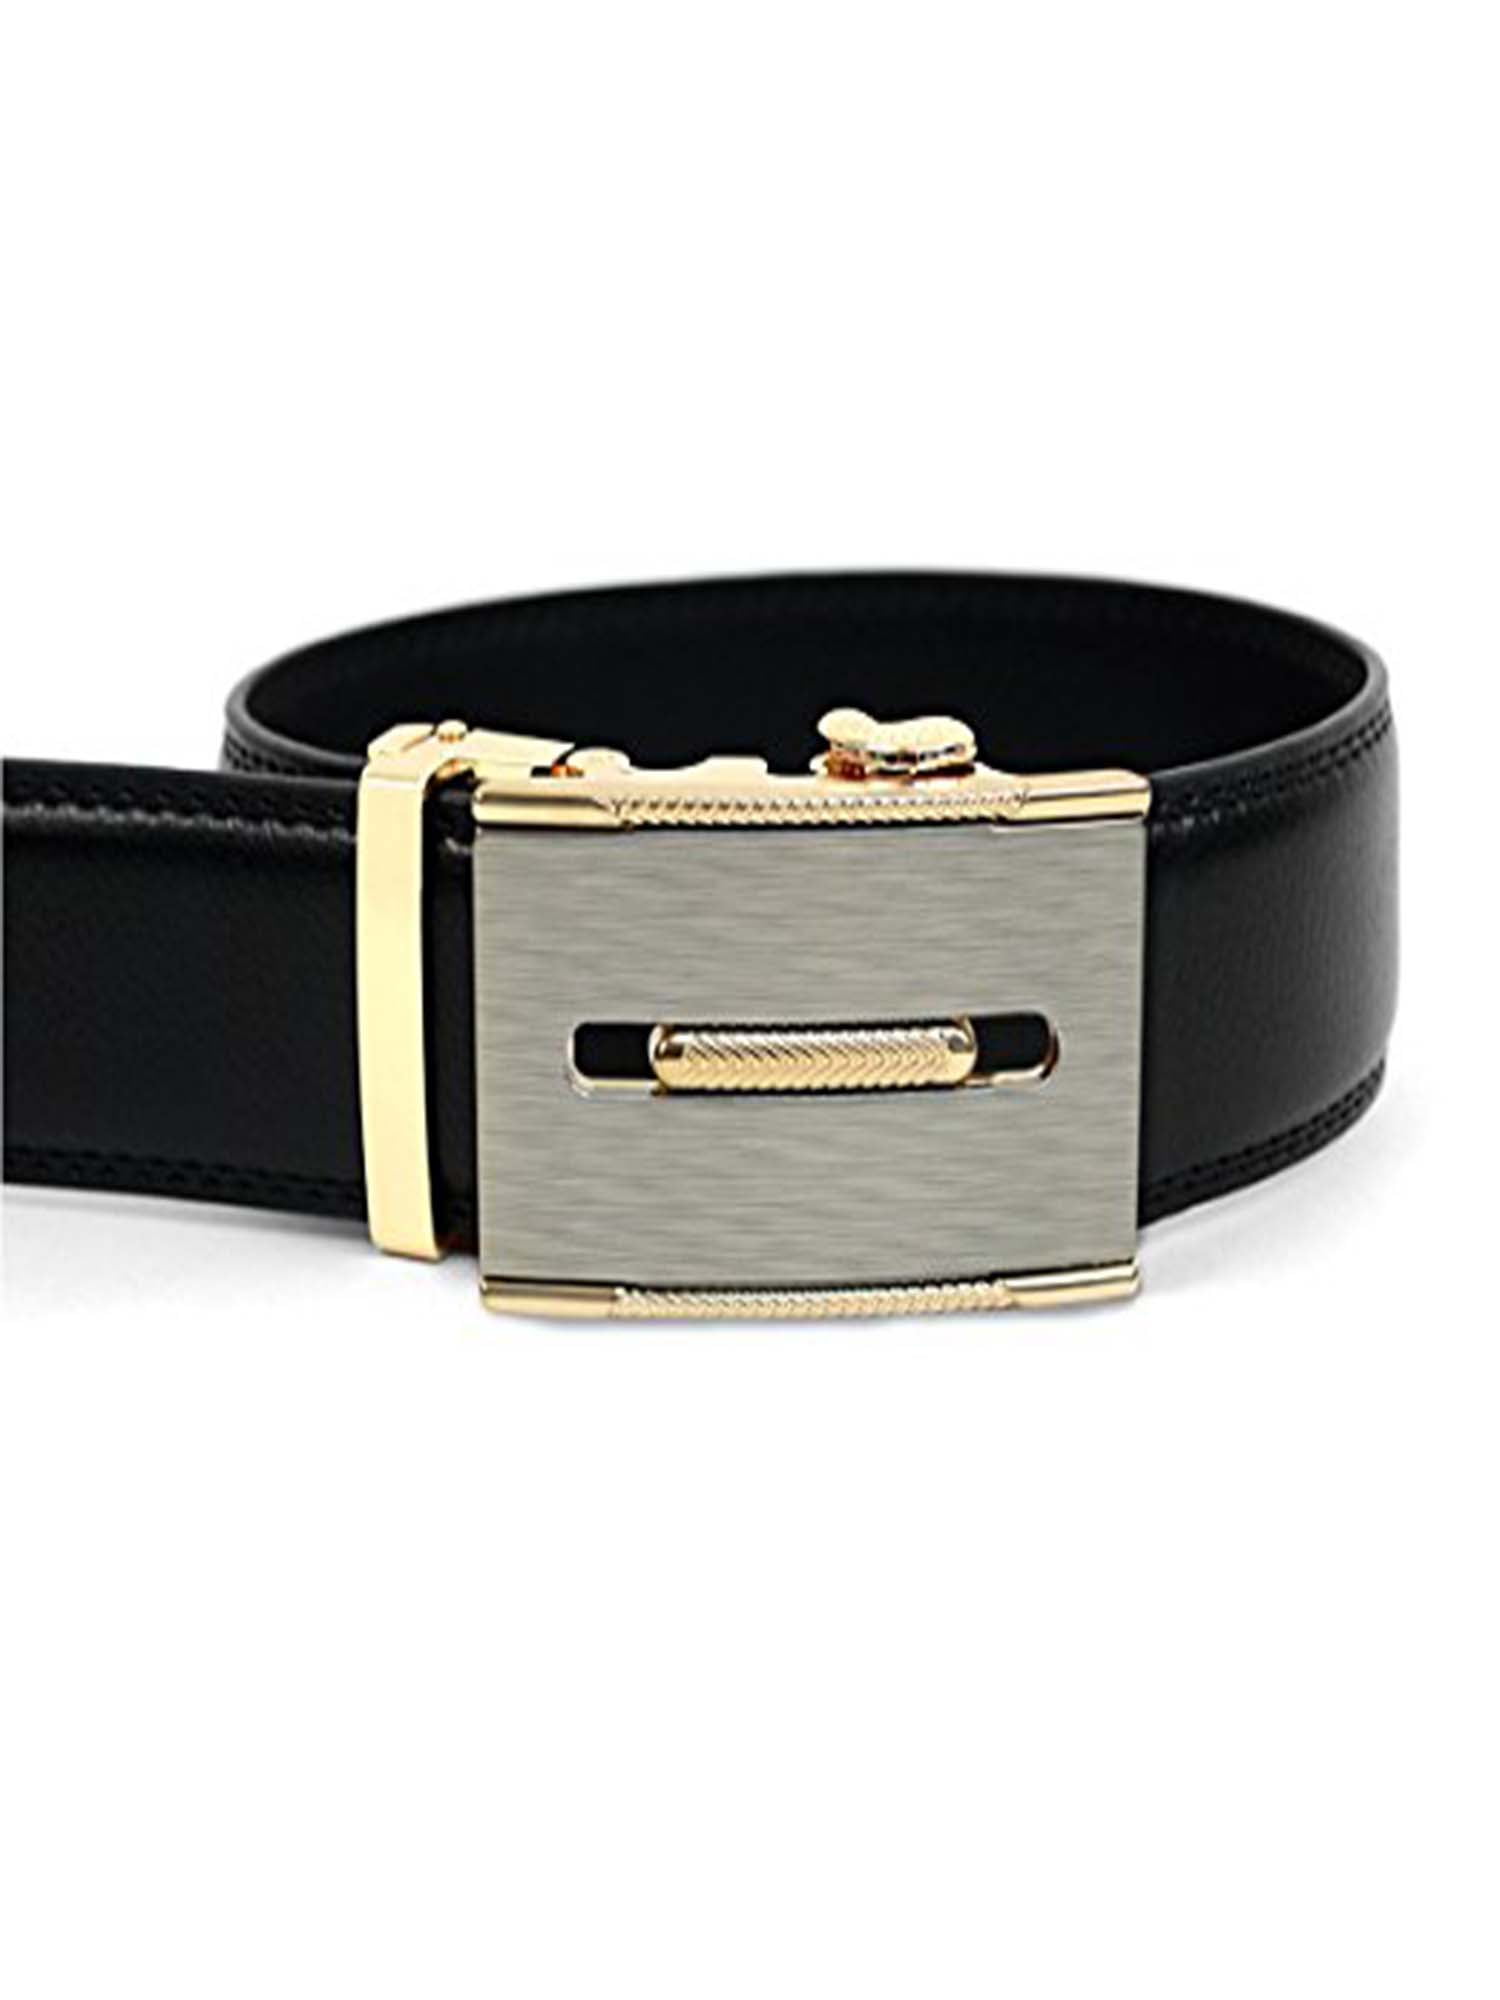 Boxed Gifts - Men’s Leather Ratchet Belt with Against the Grain Automatic Buckle (MGLBB13 ...